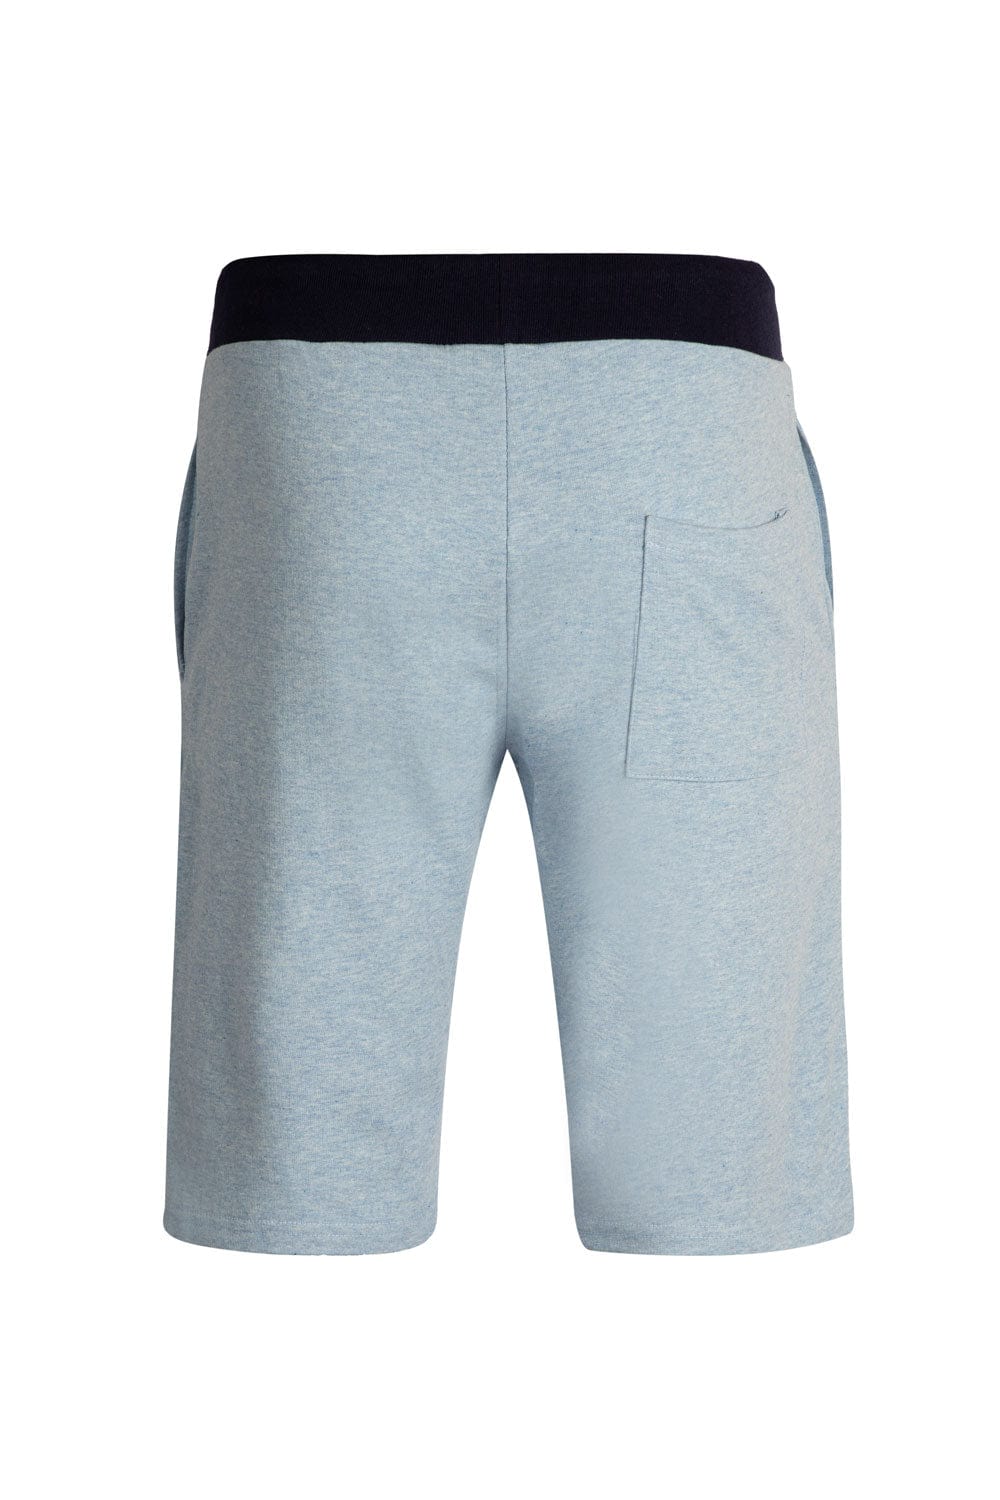 Shorts - Blue Knit Short hmkbs210422 - HOPE NOT OUT by Shahid Afridi